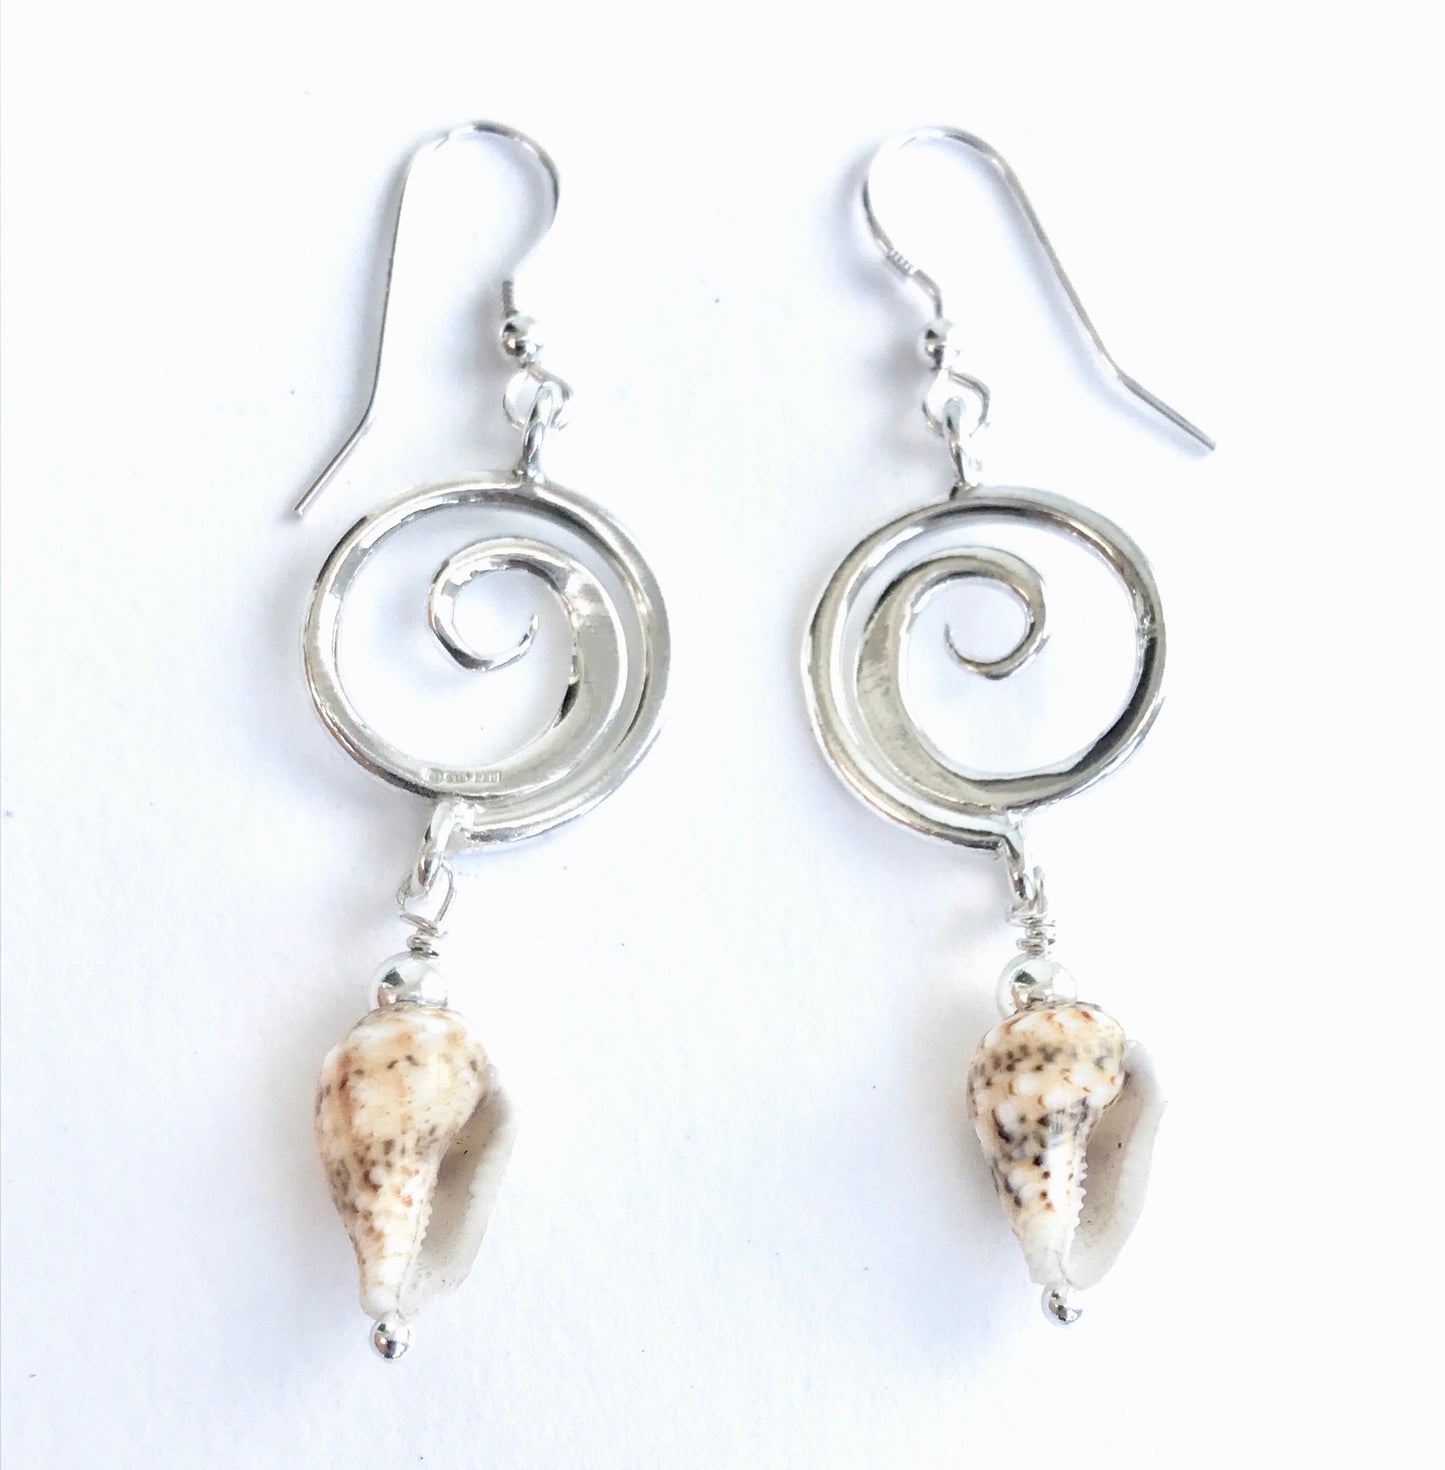 Wave earrings with shell drop